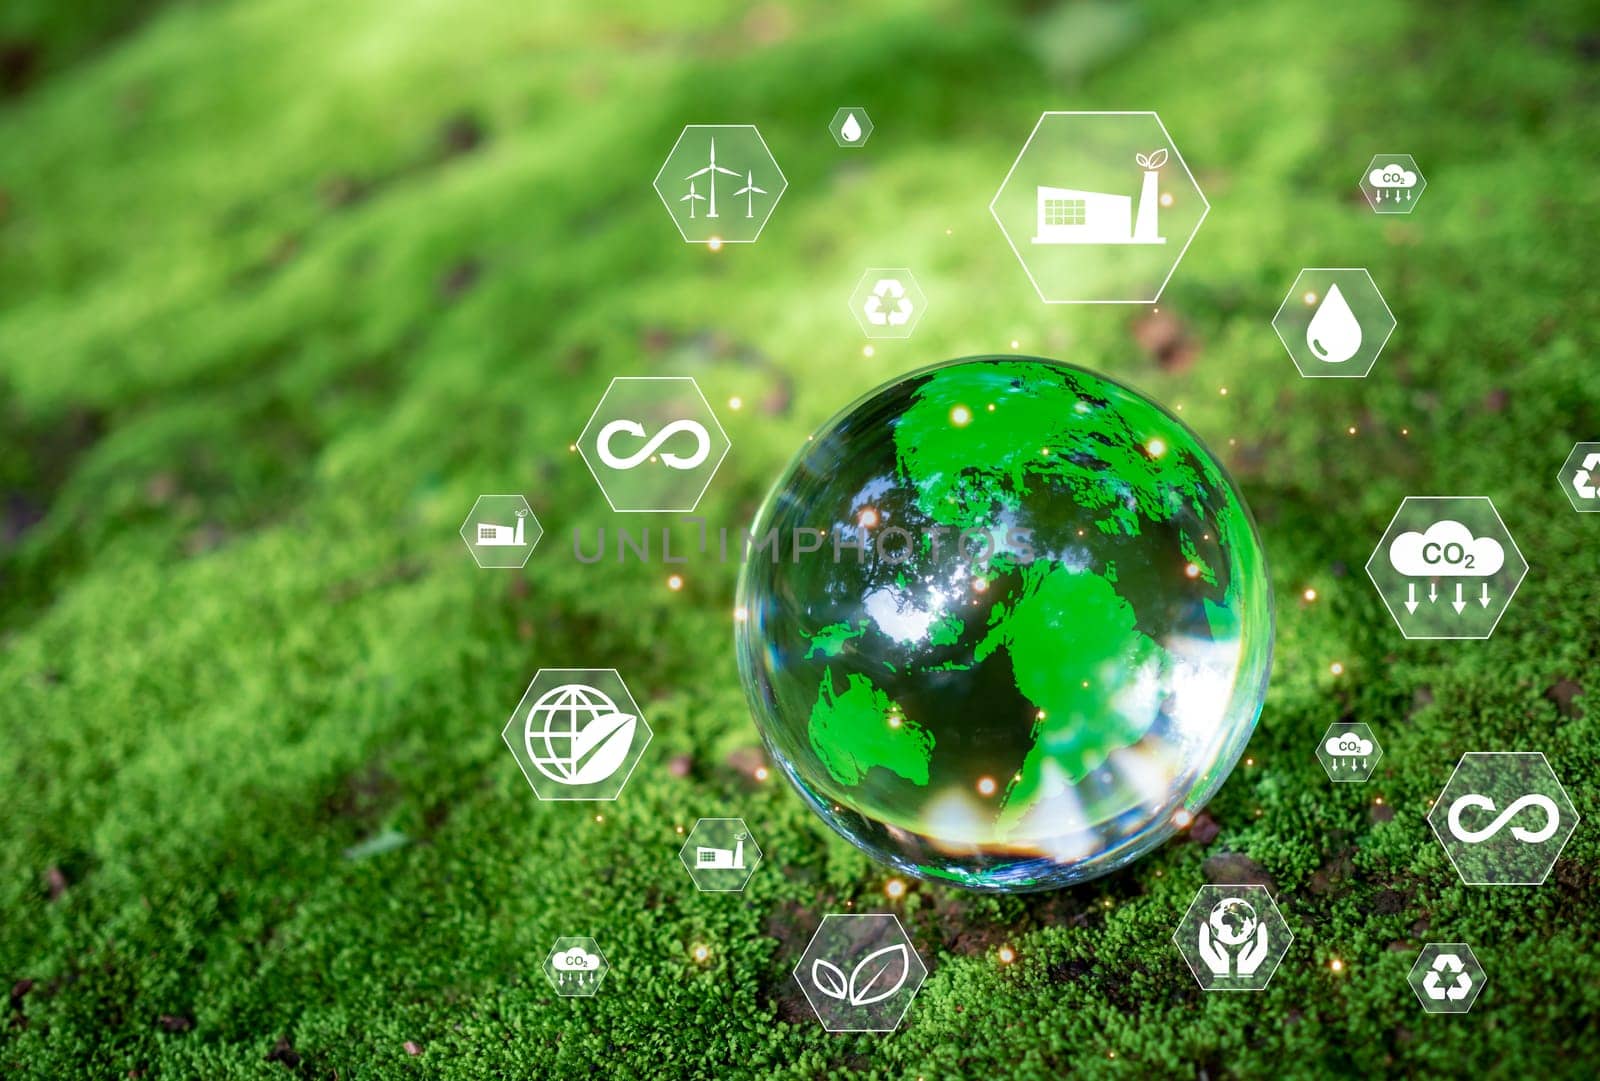 Crystal ball on moss in green forest. CO2 emission reduction concept, clean and friendly environment without carbon dioxide emissions. Planting trees to reduce CO2 emissions, environmental protection concept.